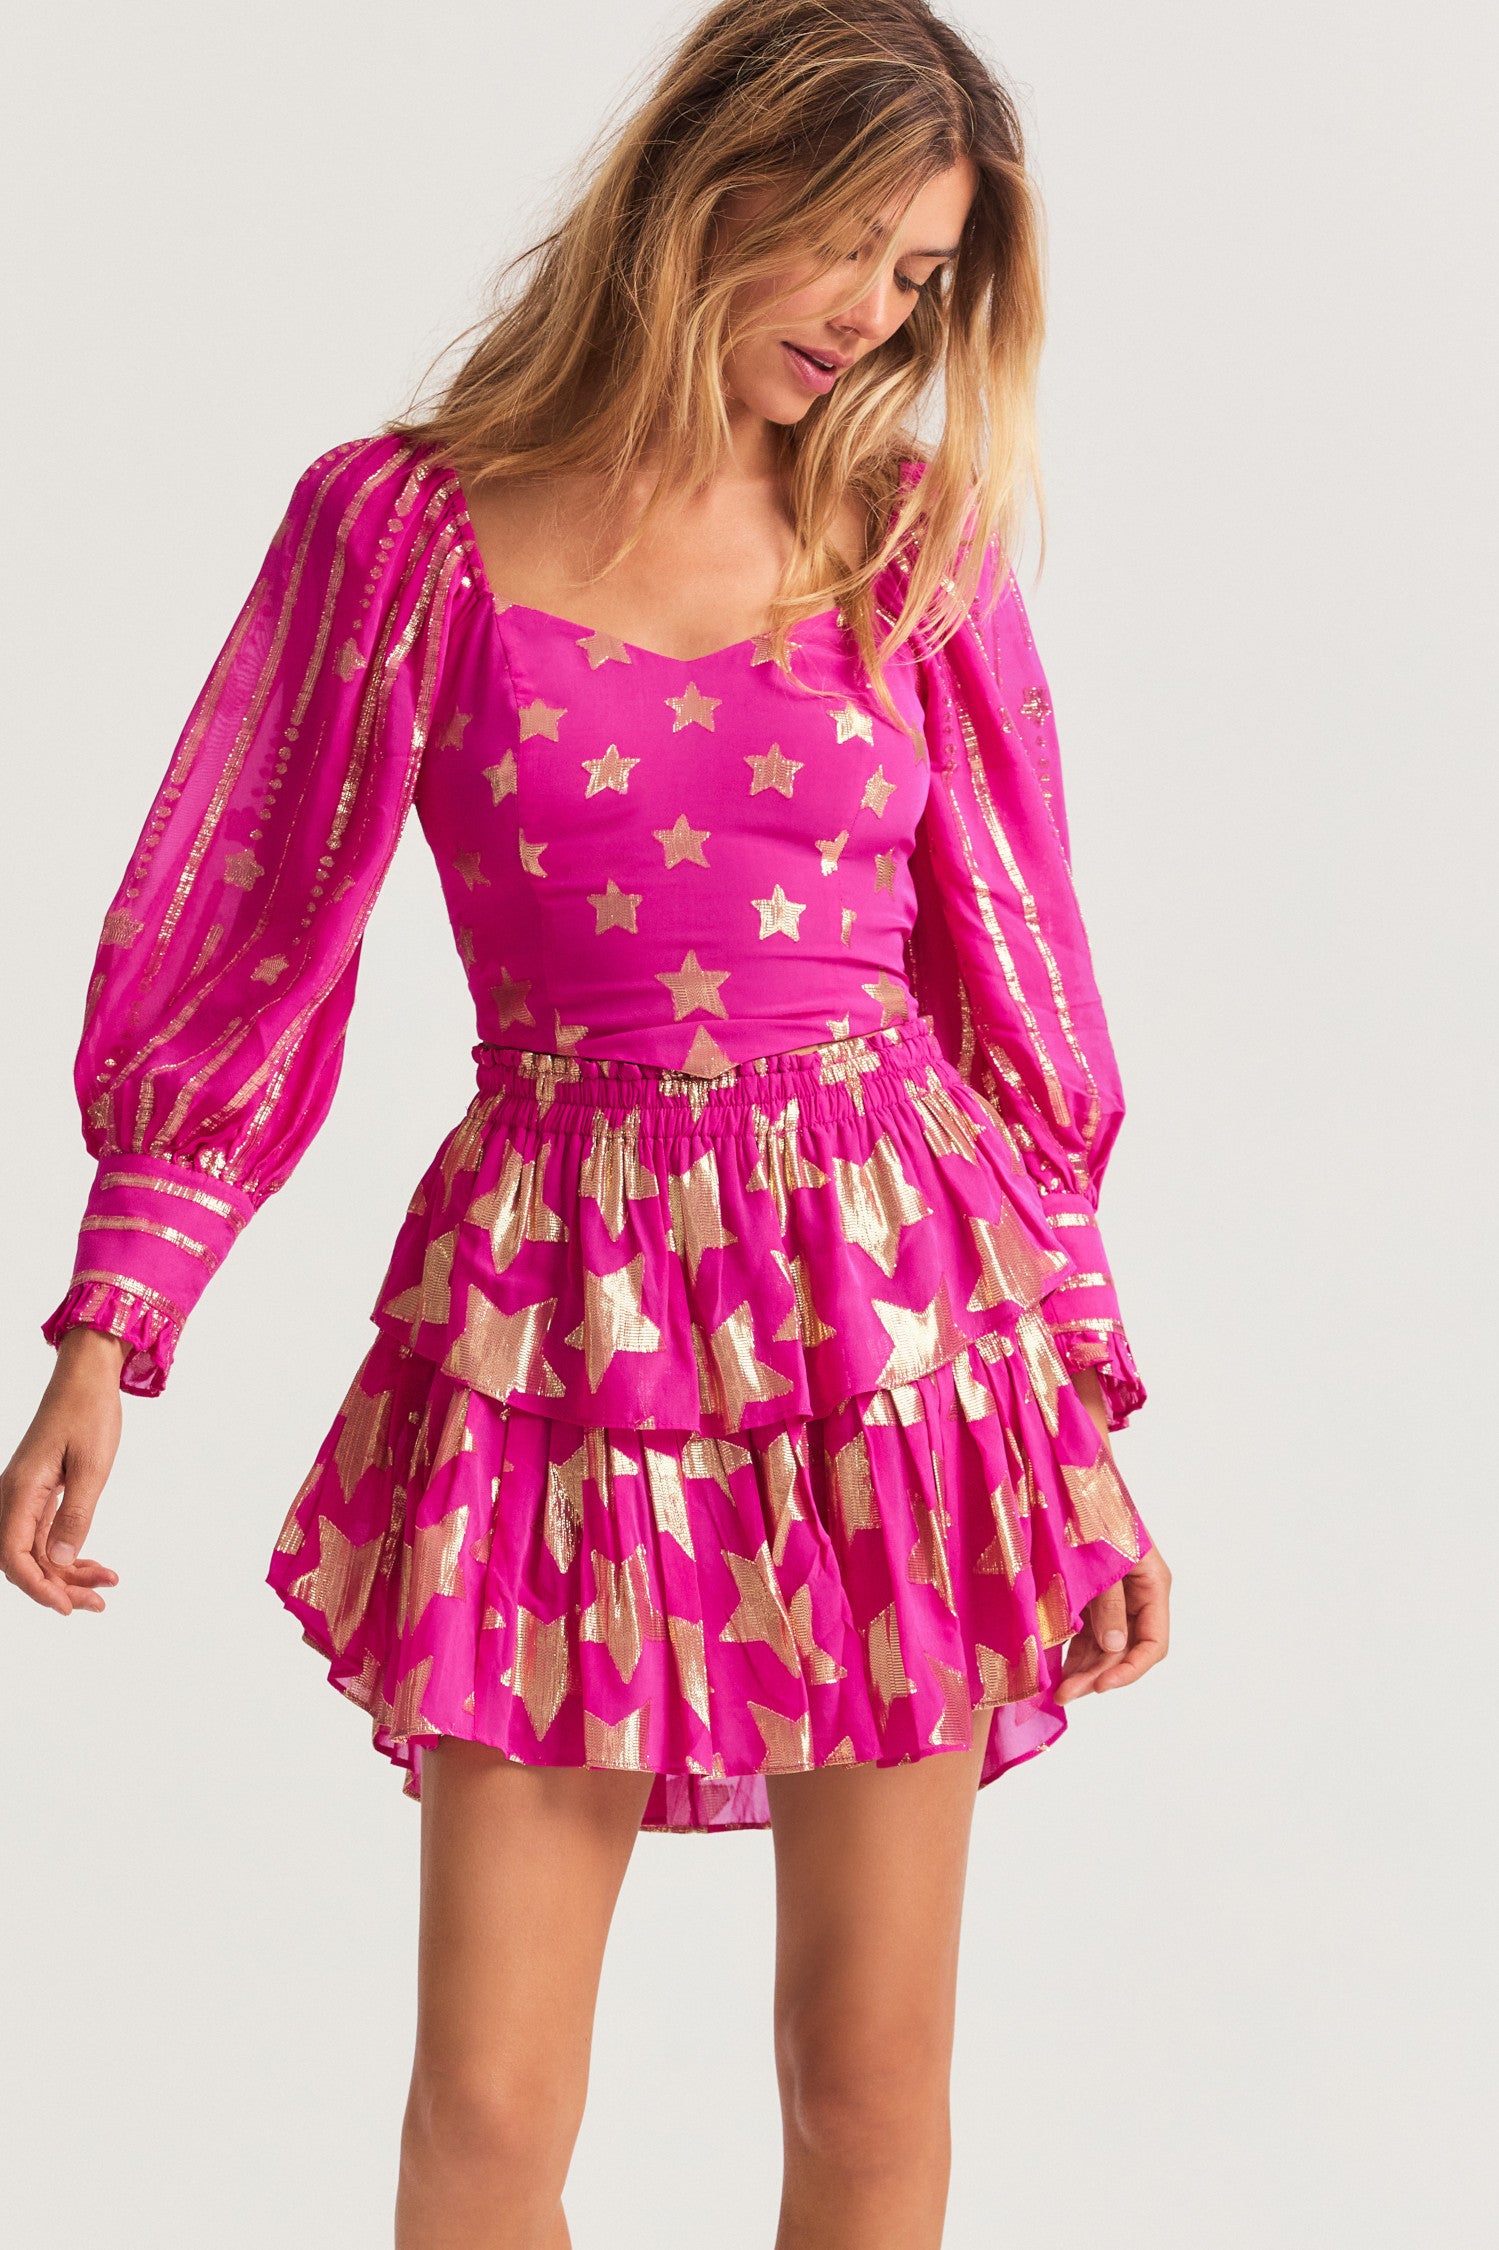 Bright pink mini skirt in viscose fabric with metallic gold star detailing. The two-tiered short skirt, with an elasticated waistband and shirred flounces. 